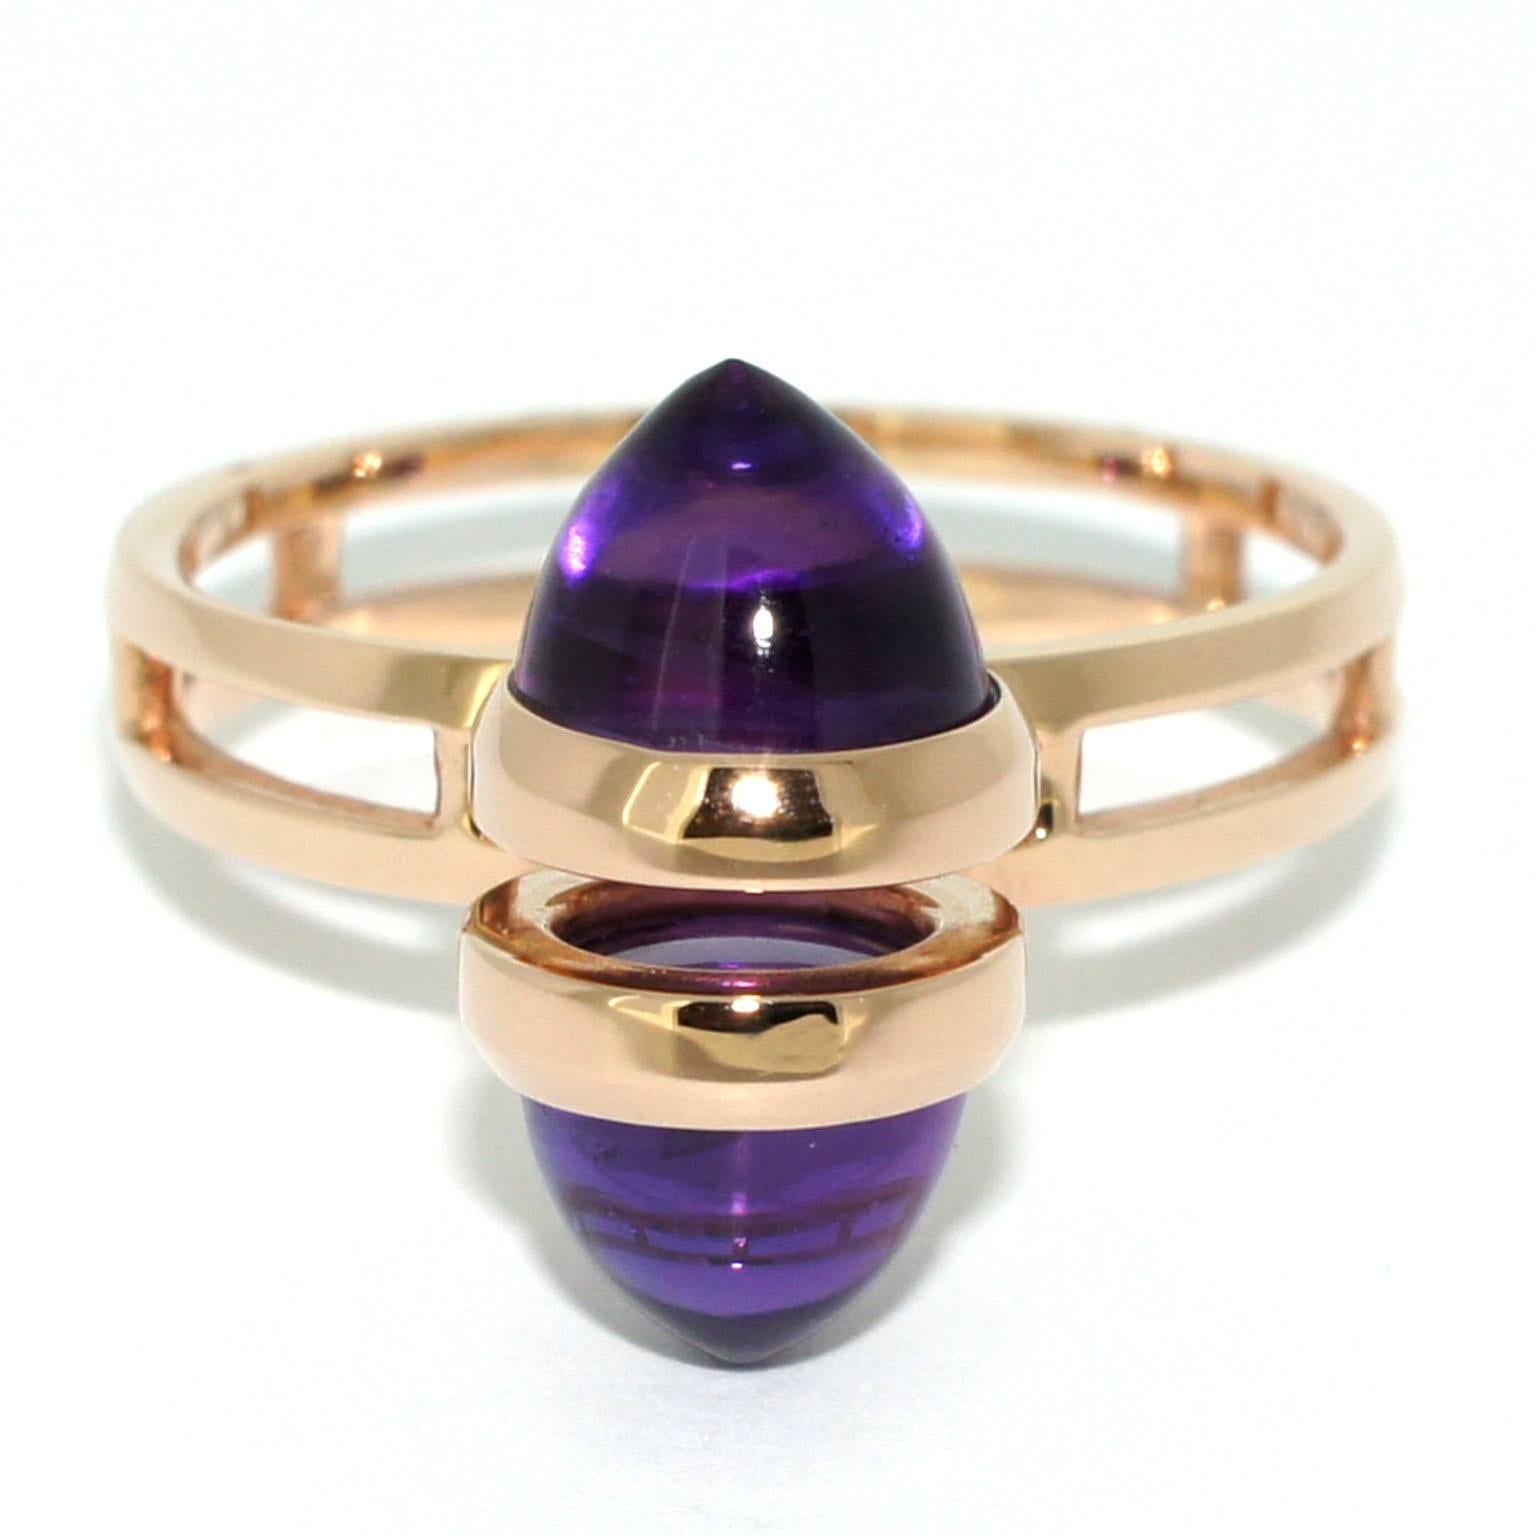 Crafted in Sydney, in 9 karat rose gold, this striking contemporary ring features two beautiful royal purple Brazilian amethysts, set atop a double band in a tandem formation.

Ring size Q (UK/Australian), 8 1/4 (US), 57.5 (European). Complimentary